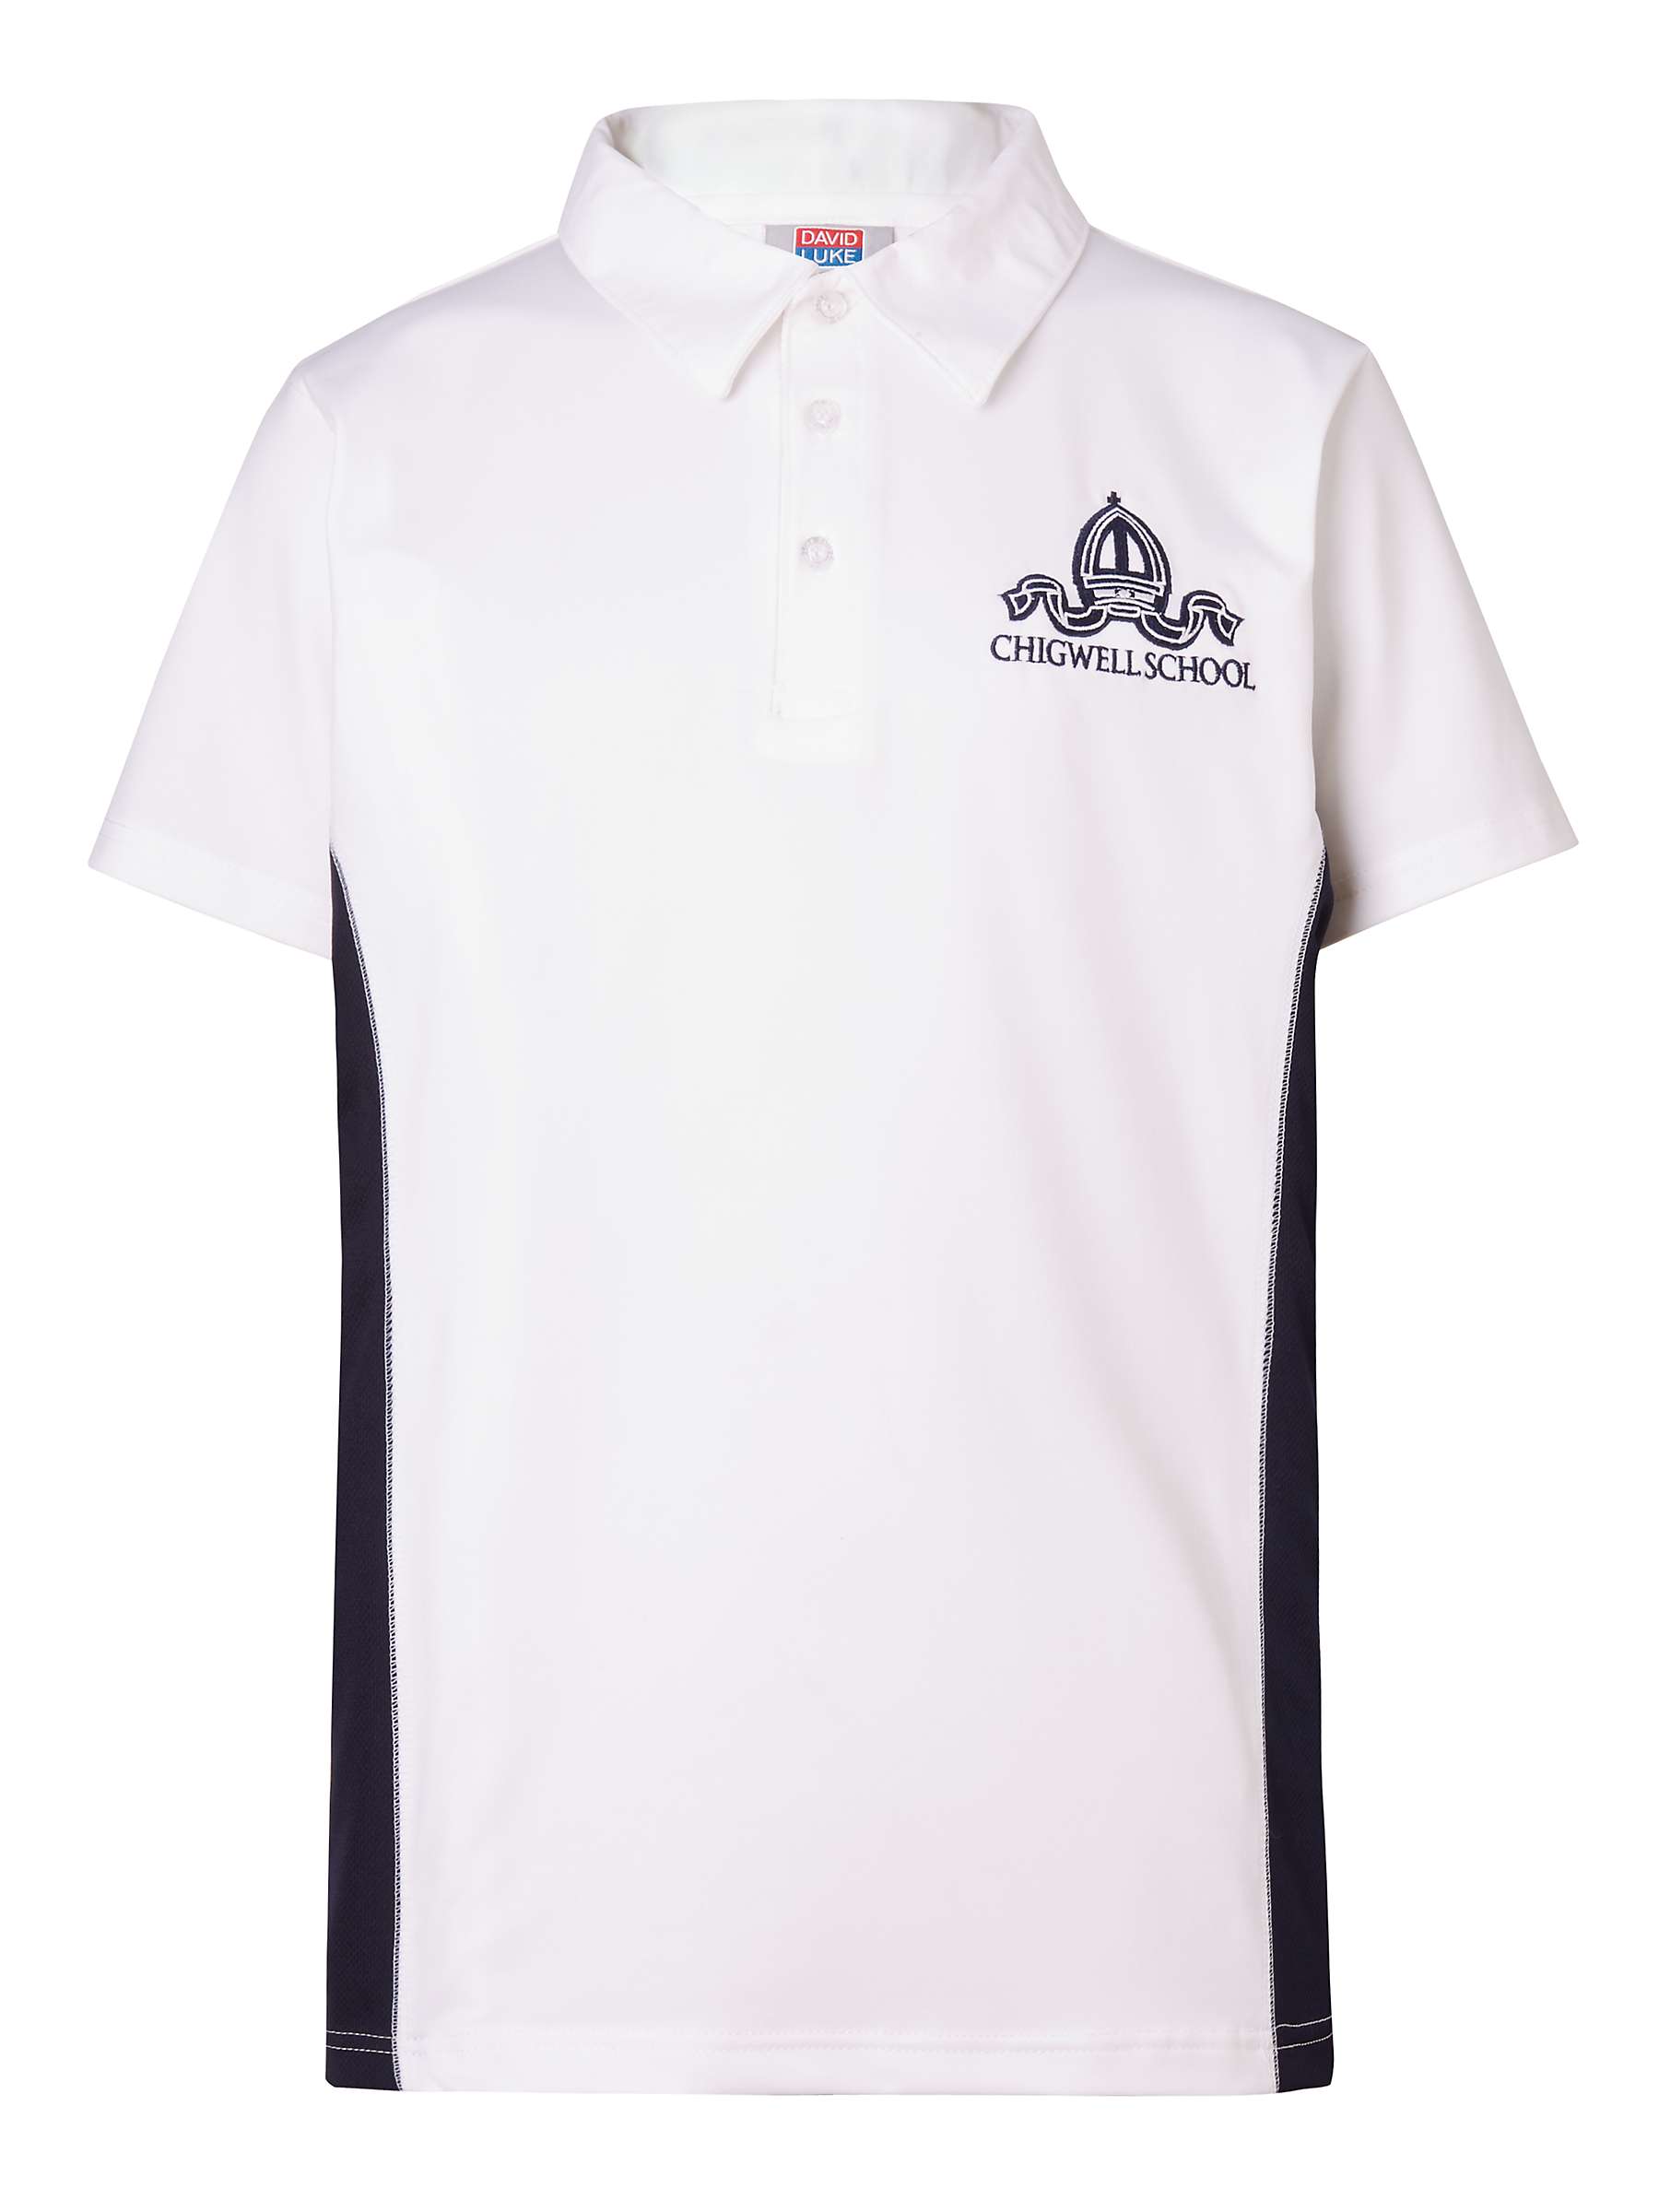 Buy Chigwell School Polo Shirt, White Online at johnlewis.com